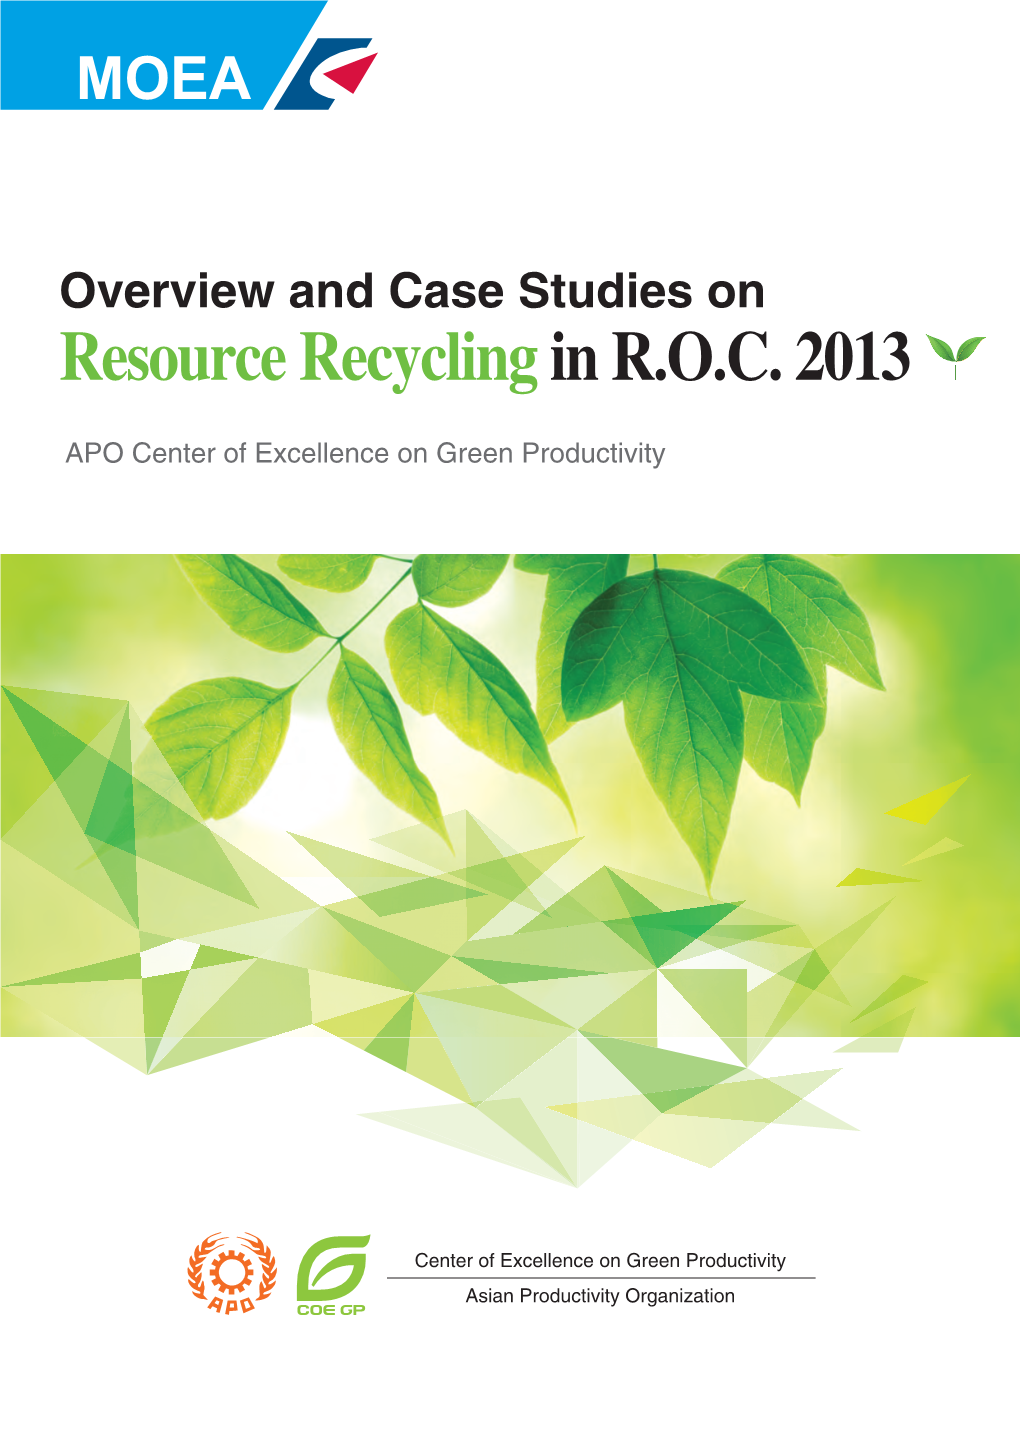 Overview and Case Studies on Resource Recycling in R.O.C. 2013